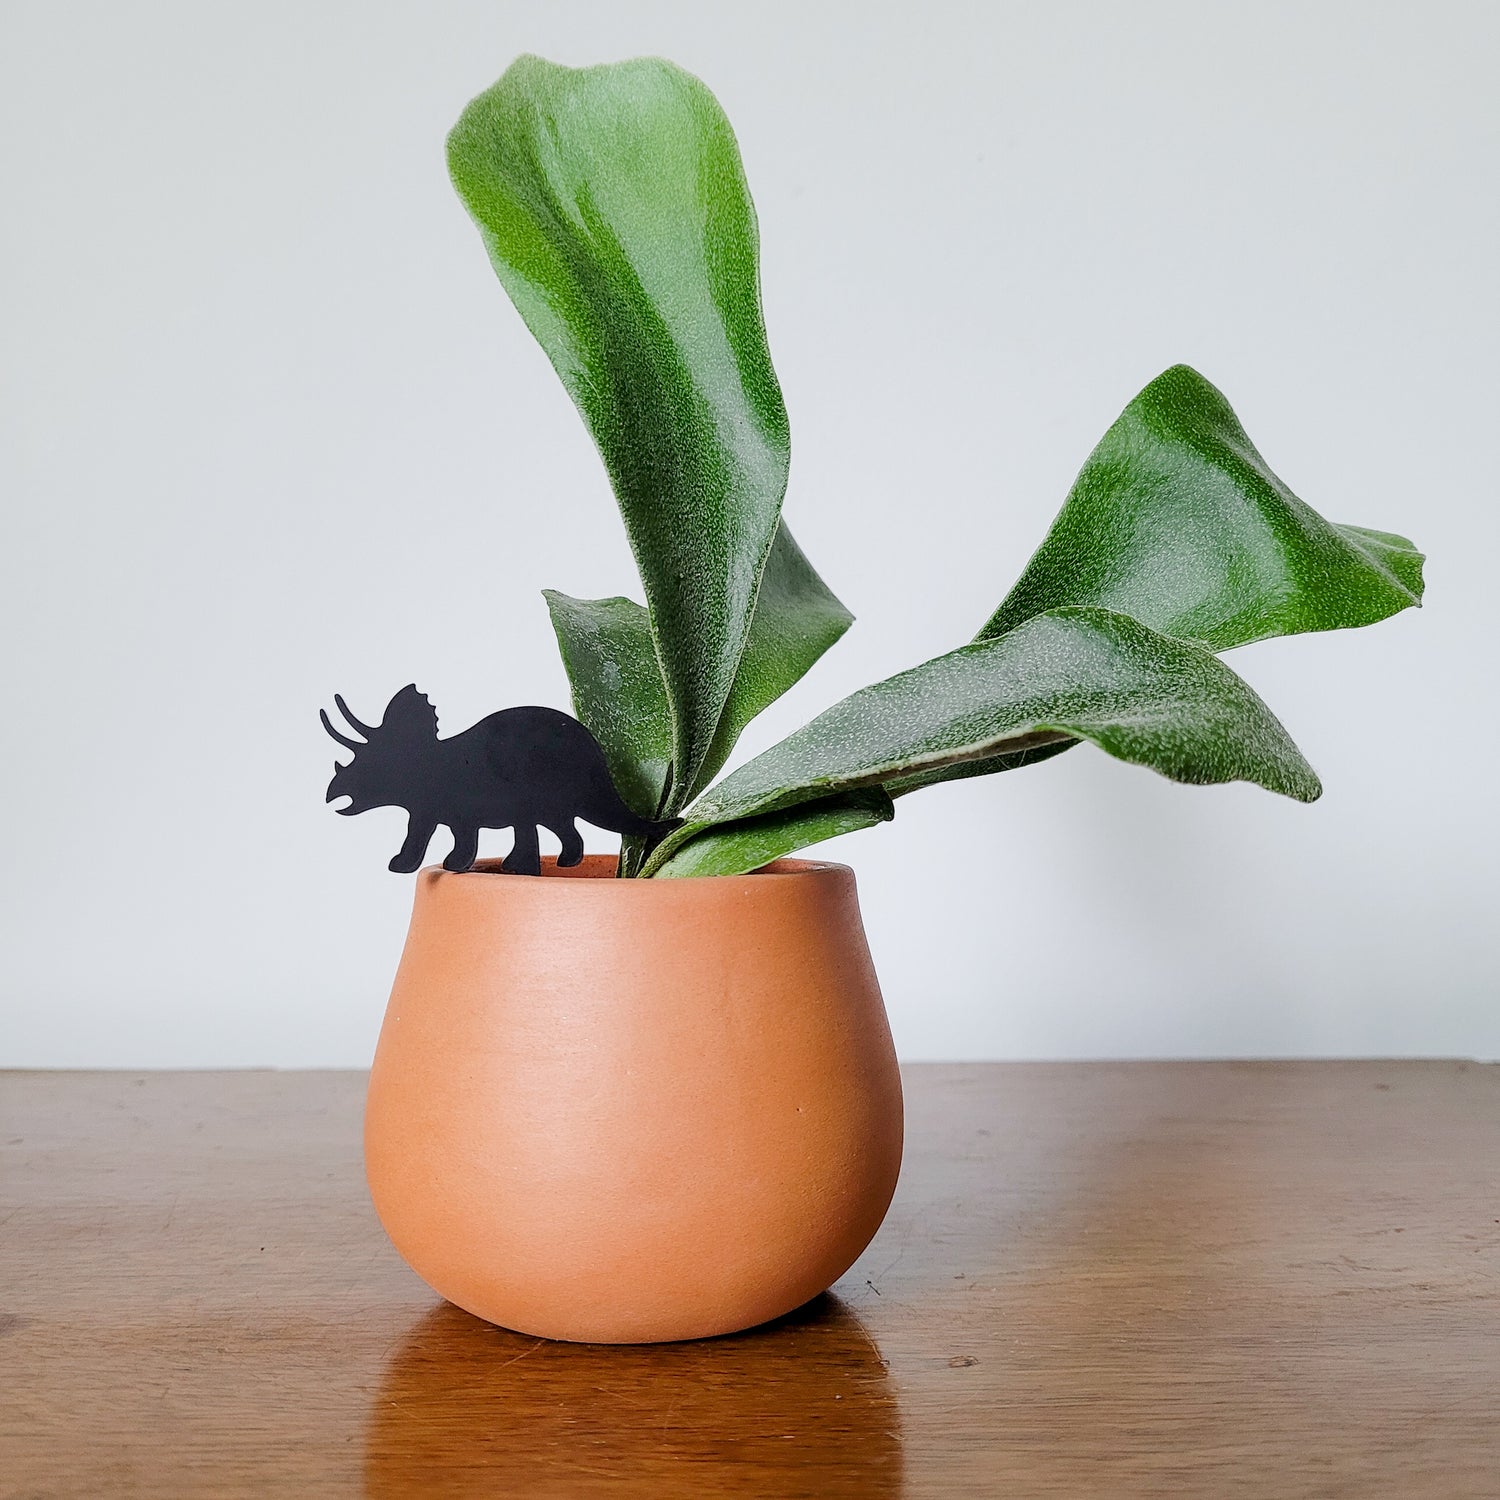 Mini Triceratops plant stake made from black acrylic displayed in 3 inch pot with a houseplant.